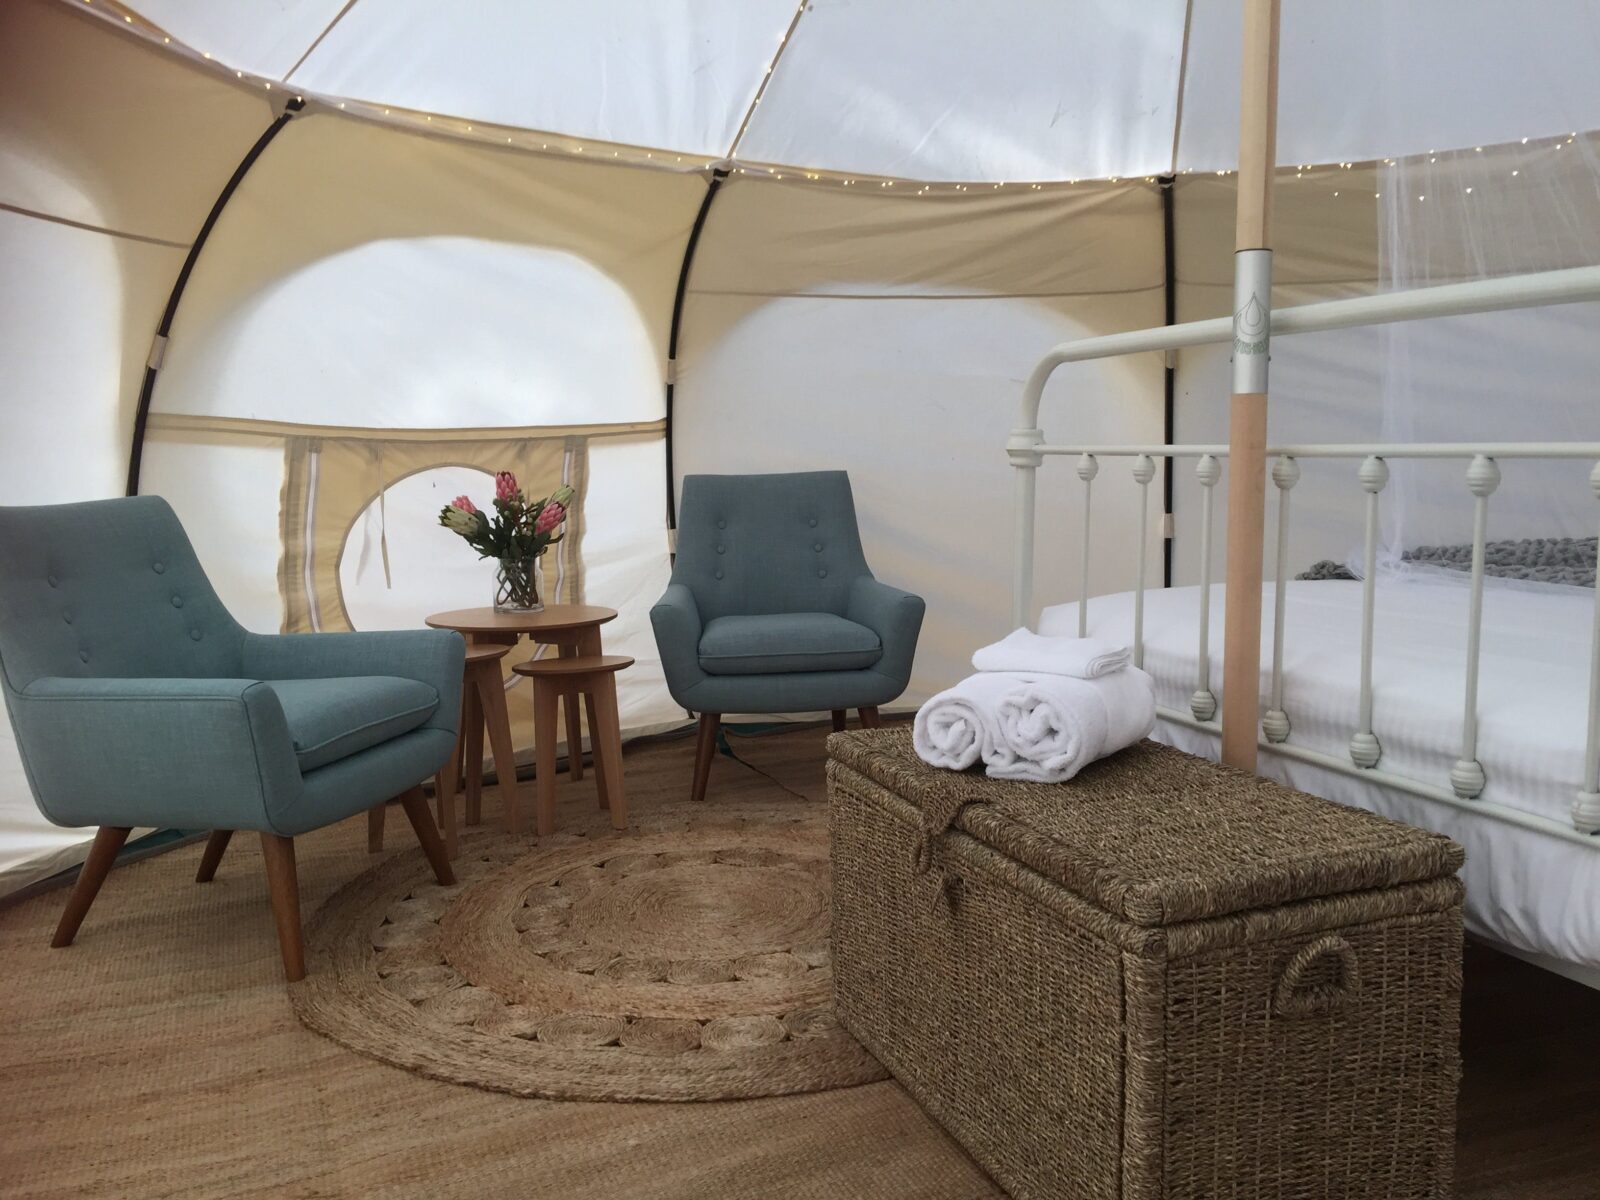 Glamp in style - Three uniquely decorated Glamping Belle Tents. Romantic 'Harmony' shown.